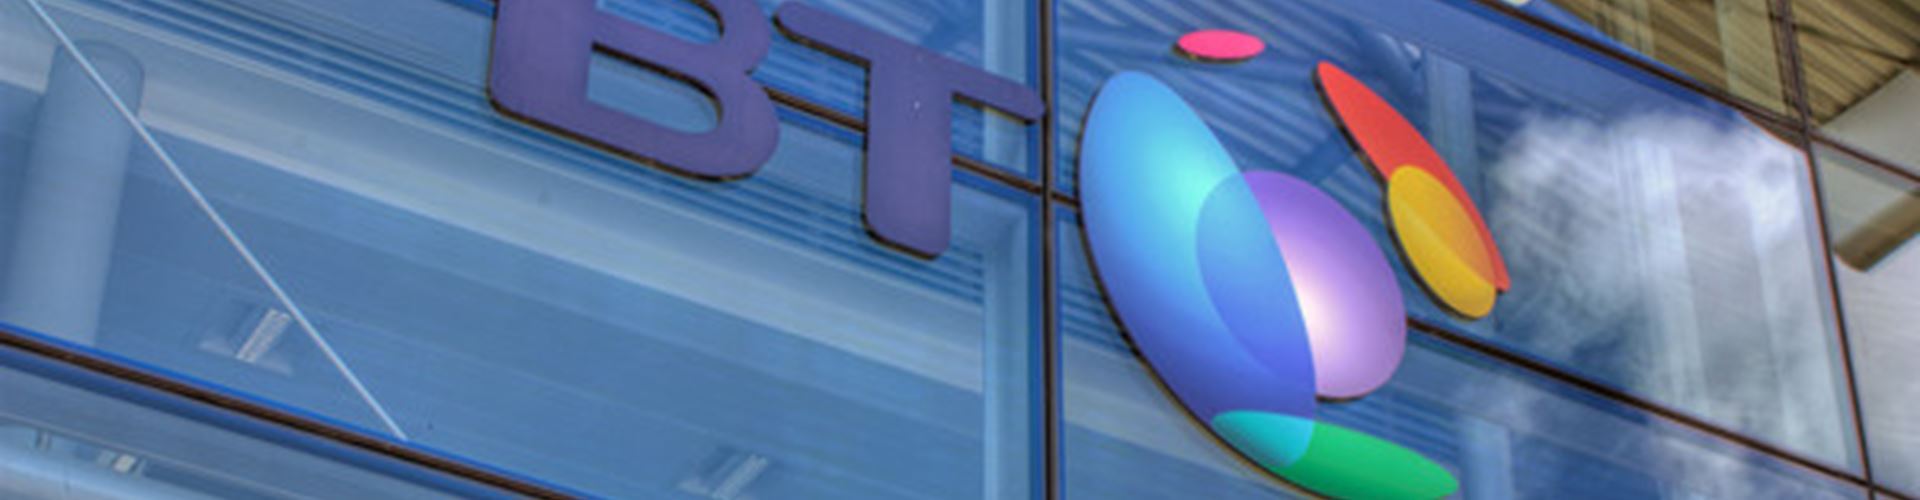 BT to buy mobile firm EE for £12.5bn